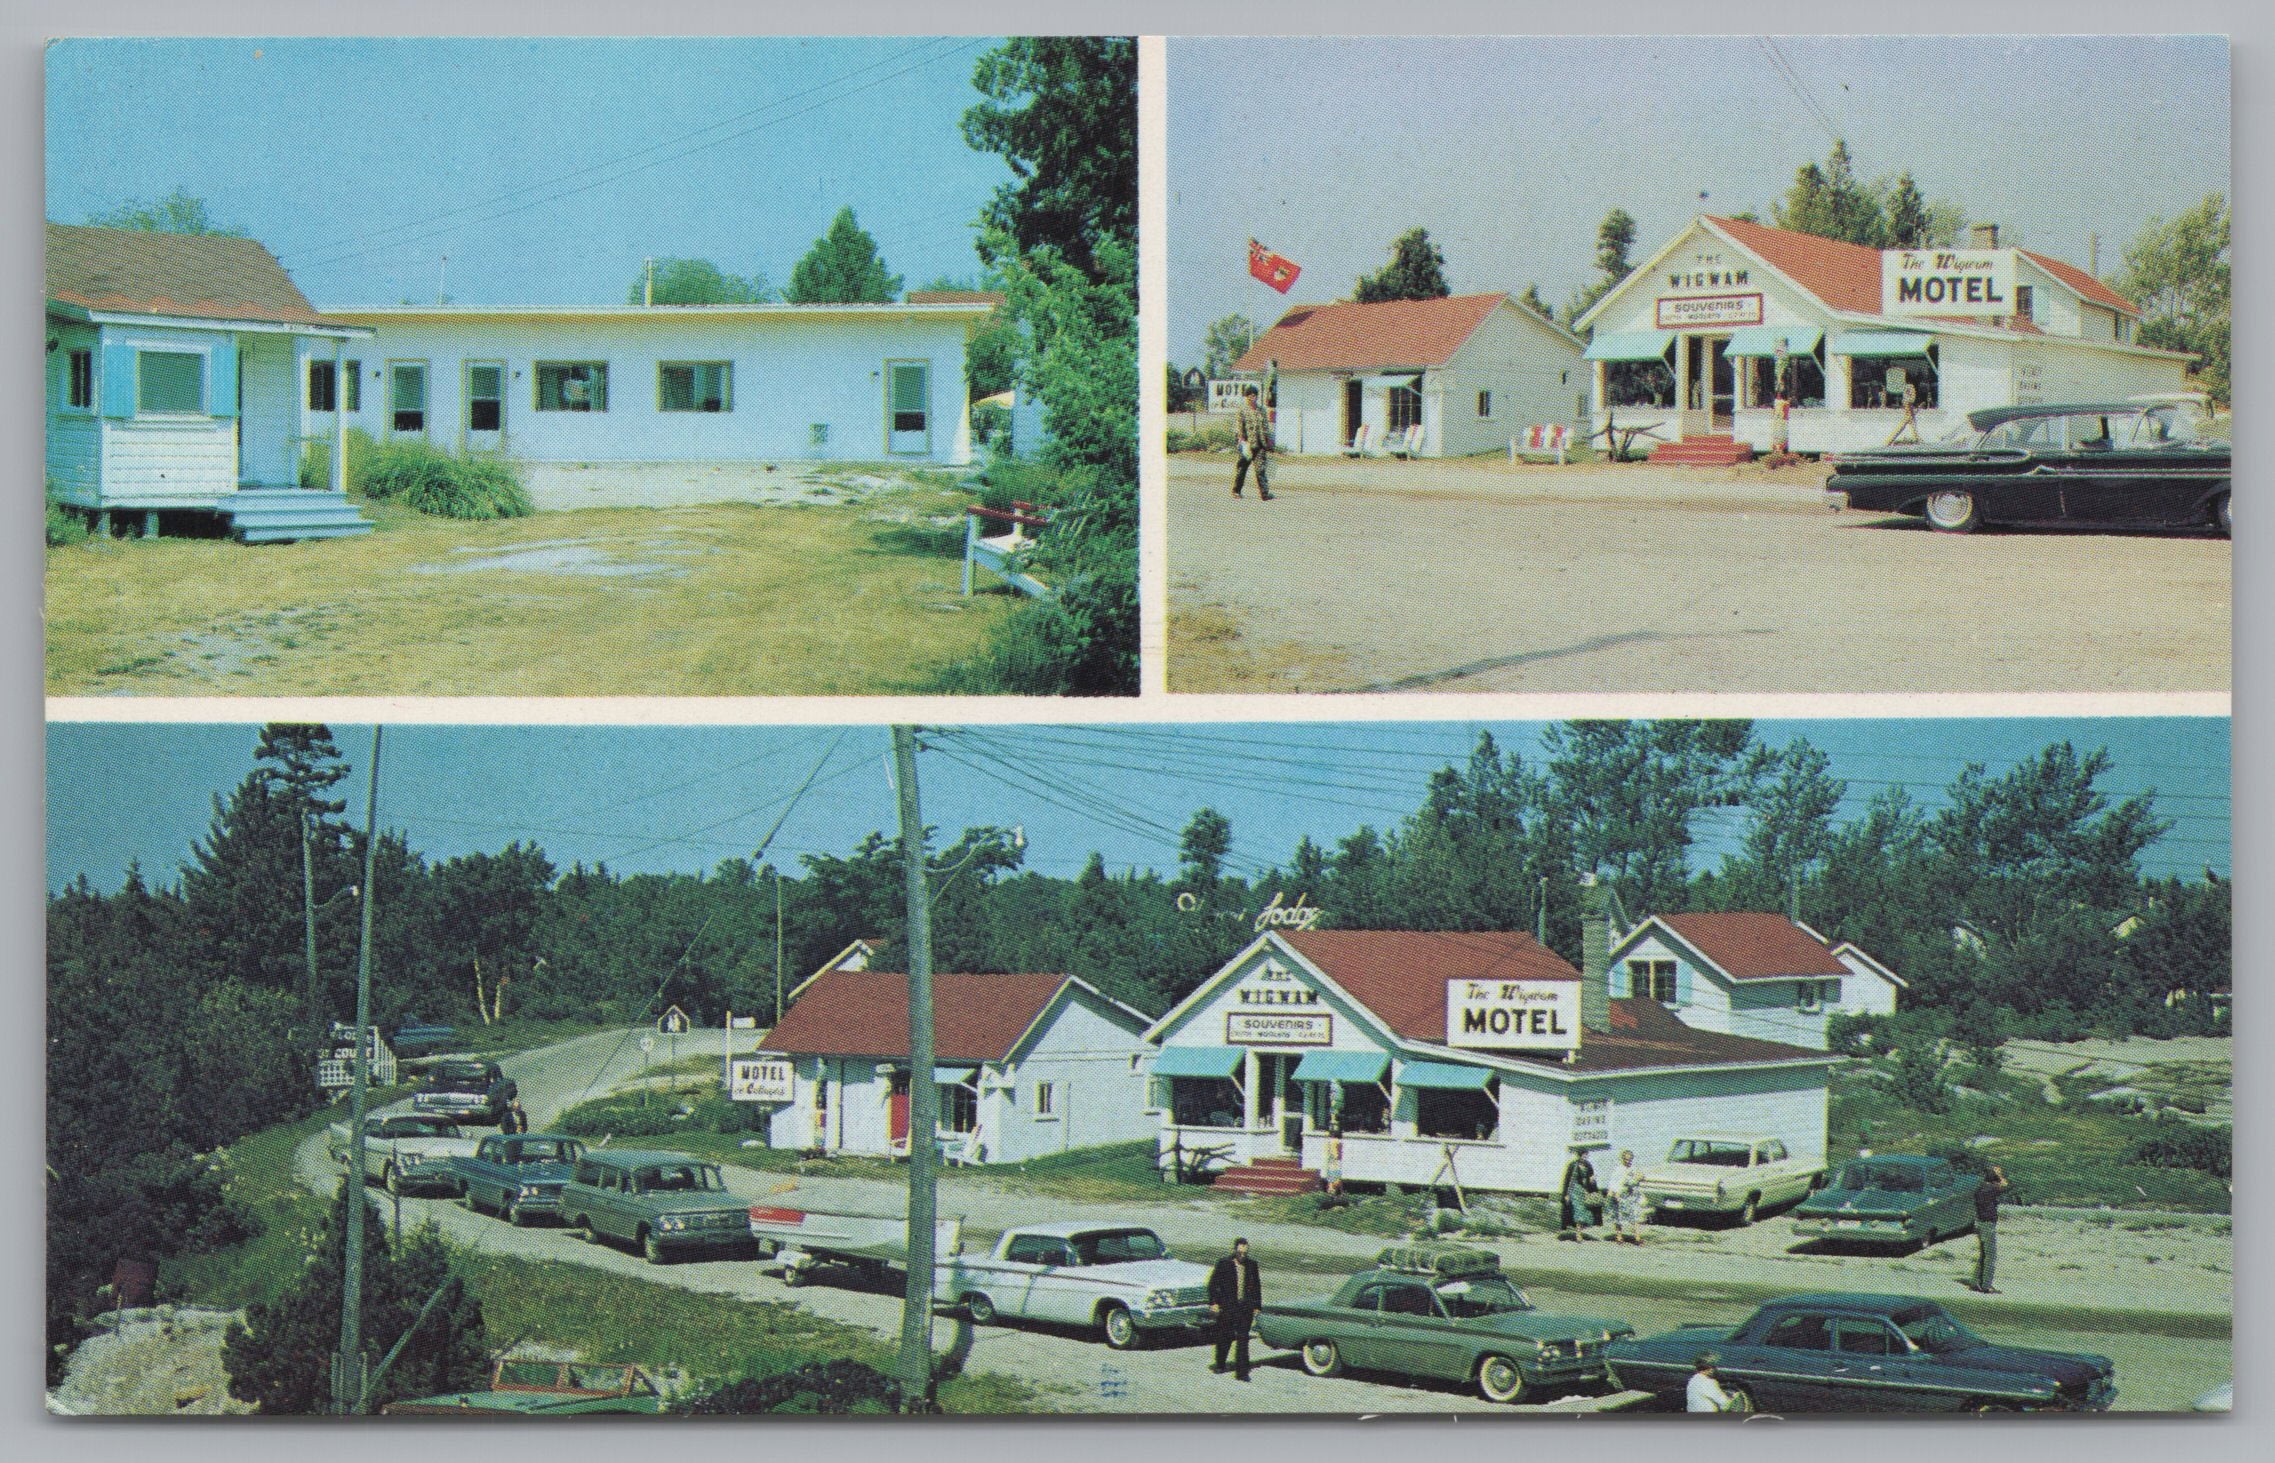 The Wigman, Cottages, Motel, Gift Shop, Ferry Dock, South Bay, Lake Huron, Vintage Post Card